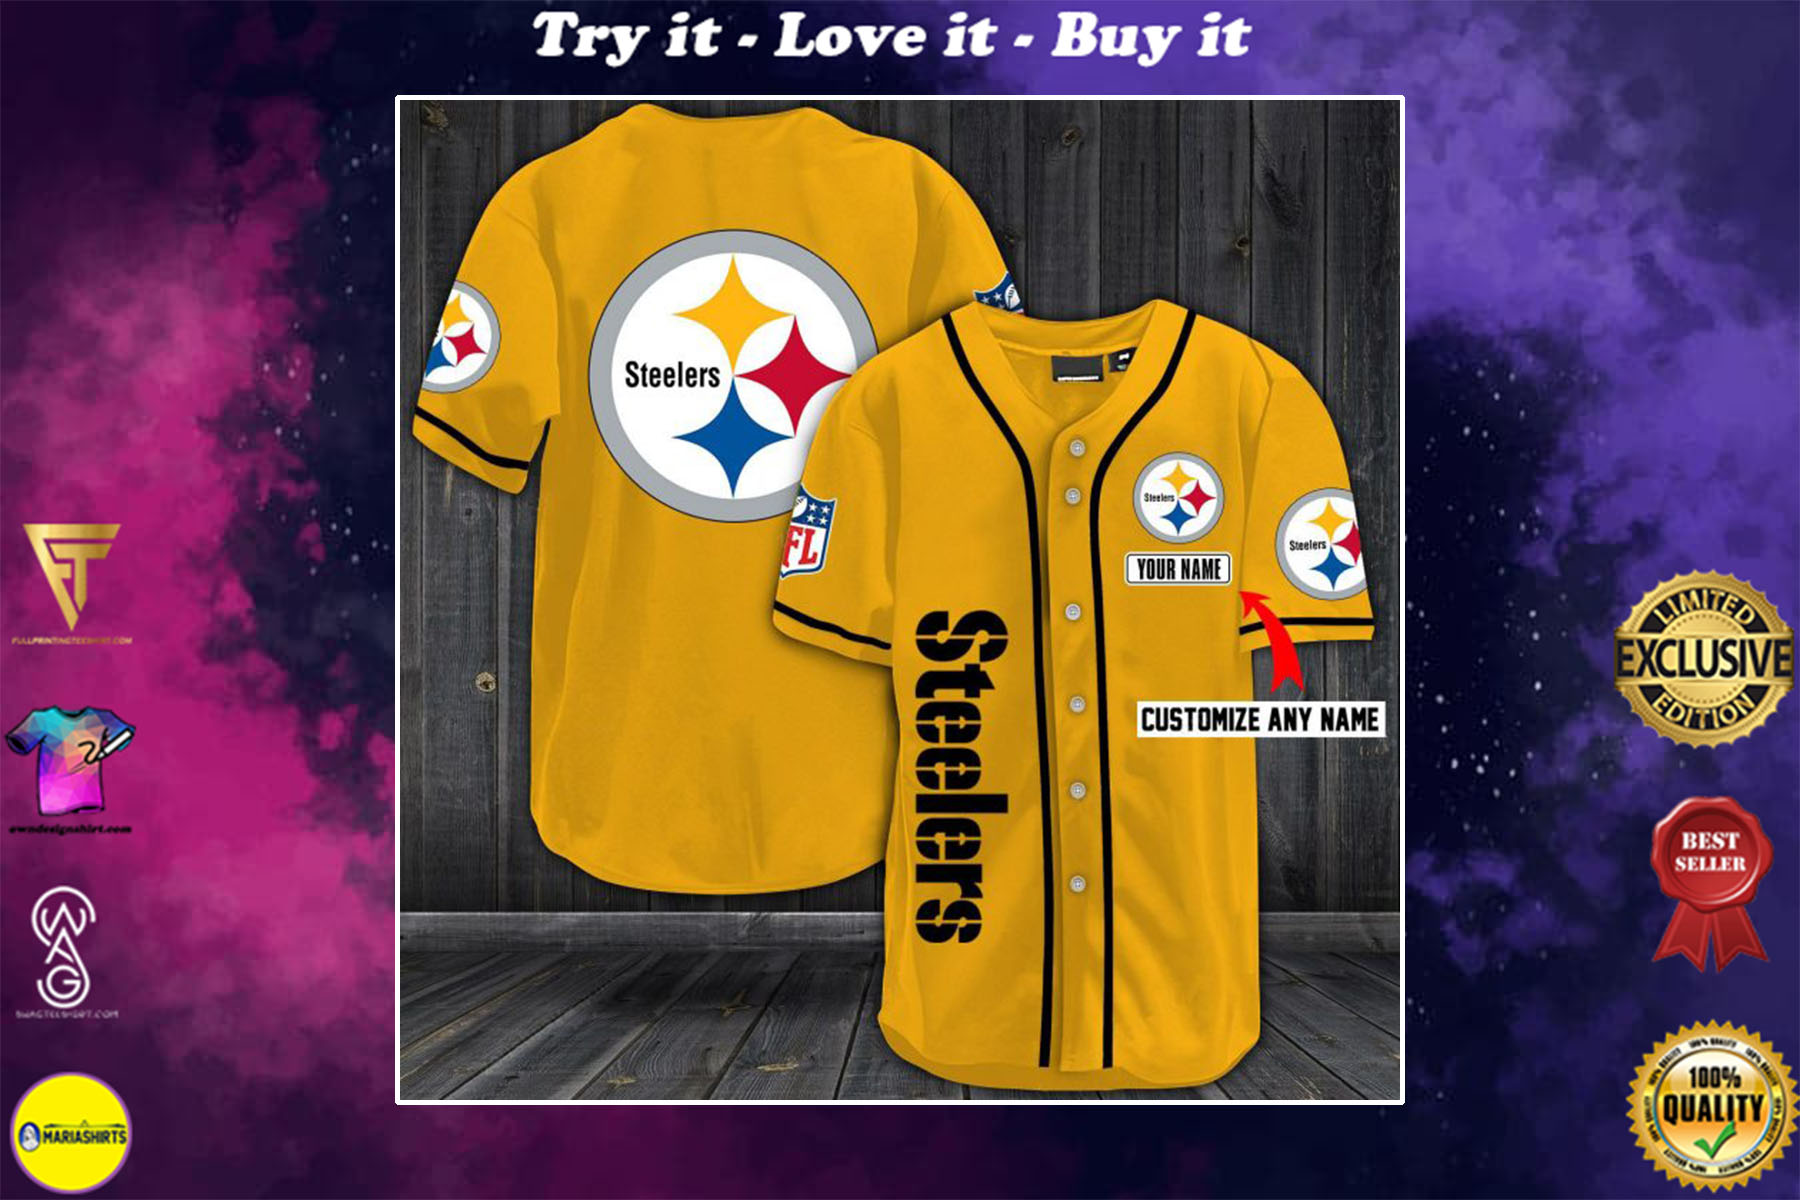 pittsburgh steelers personalized jersey